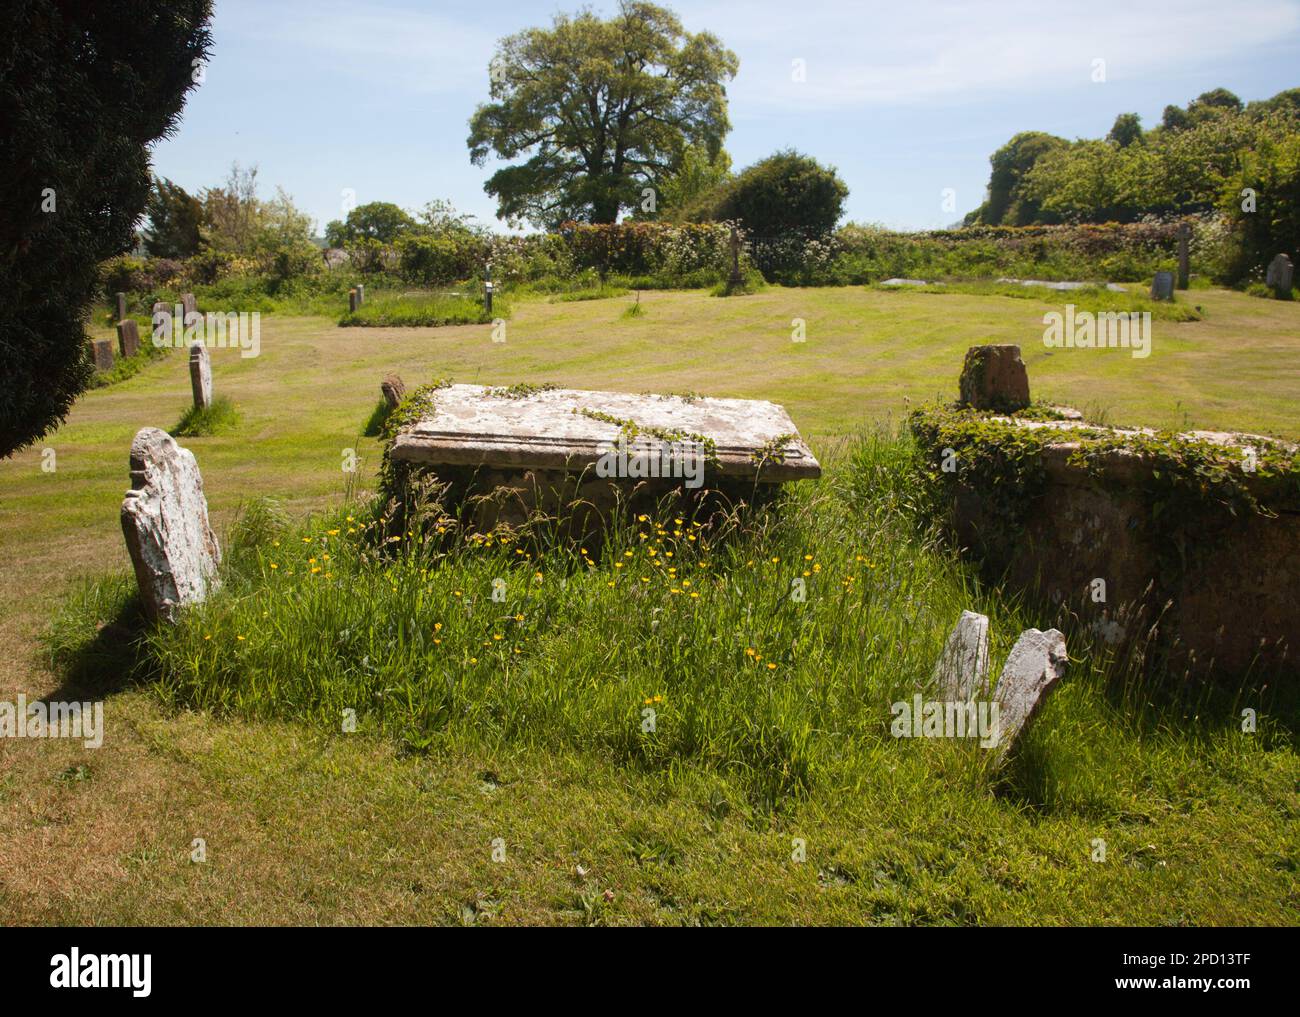 The peaceful countryside cemetery Melbury Bubb in Dorset in England during the summertime Stock Photo